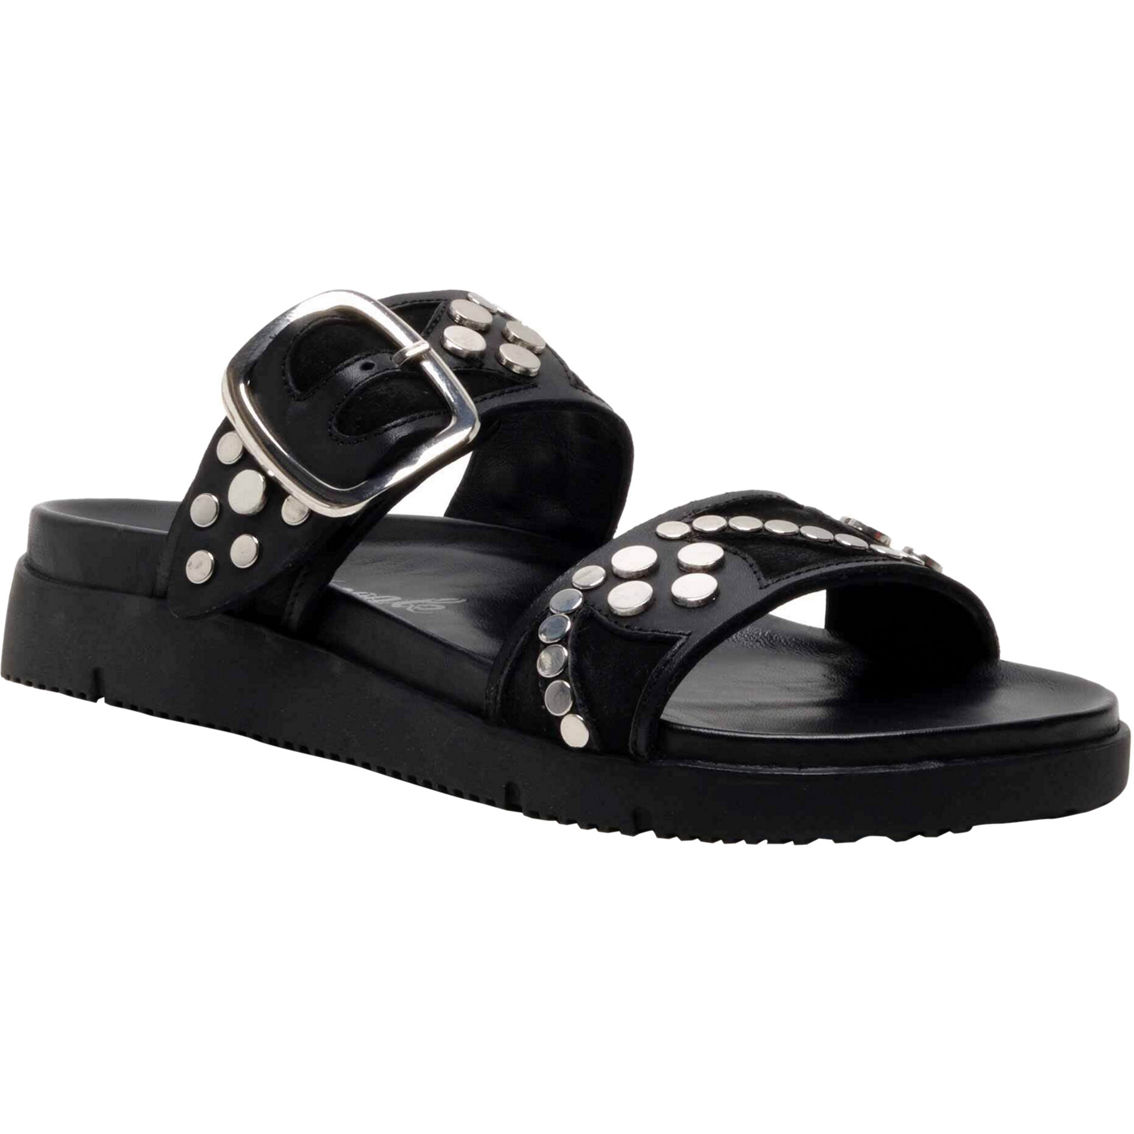 Free People Women's Revelry Studded Sandals | Flats | Shoes | Shop The ...